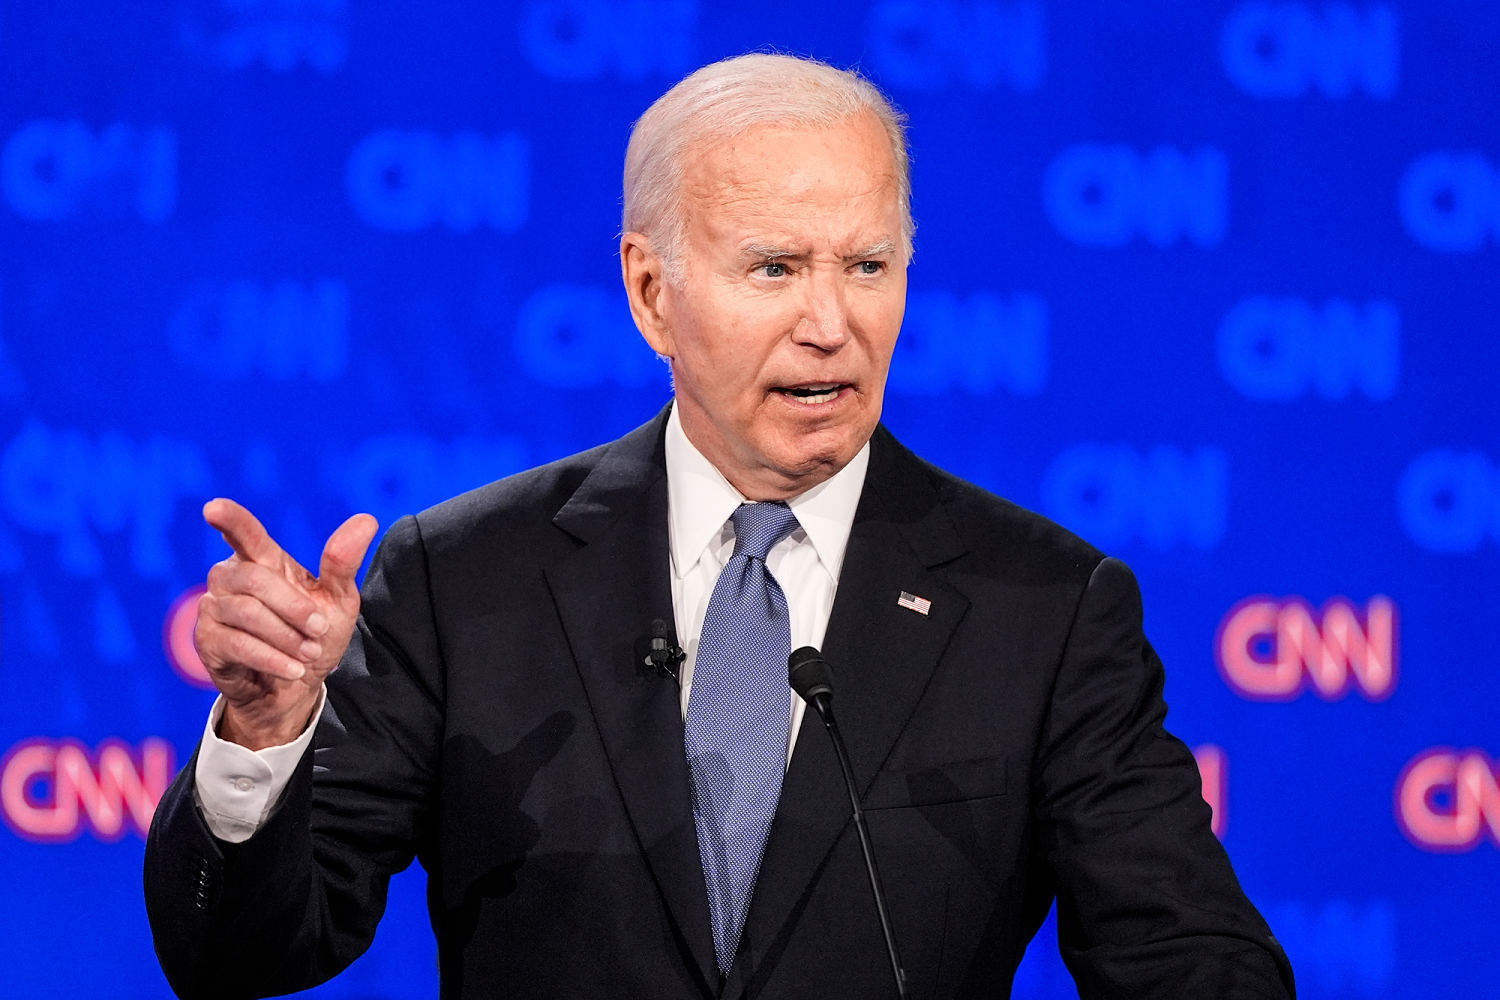 Some Democrats start calling for Biden to step aside and 'throw in the towel' on 2024